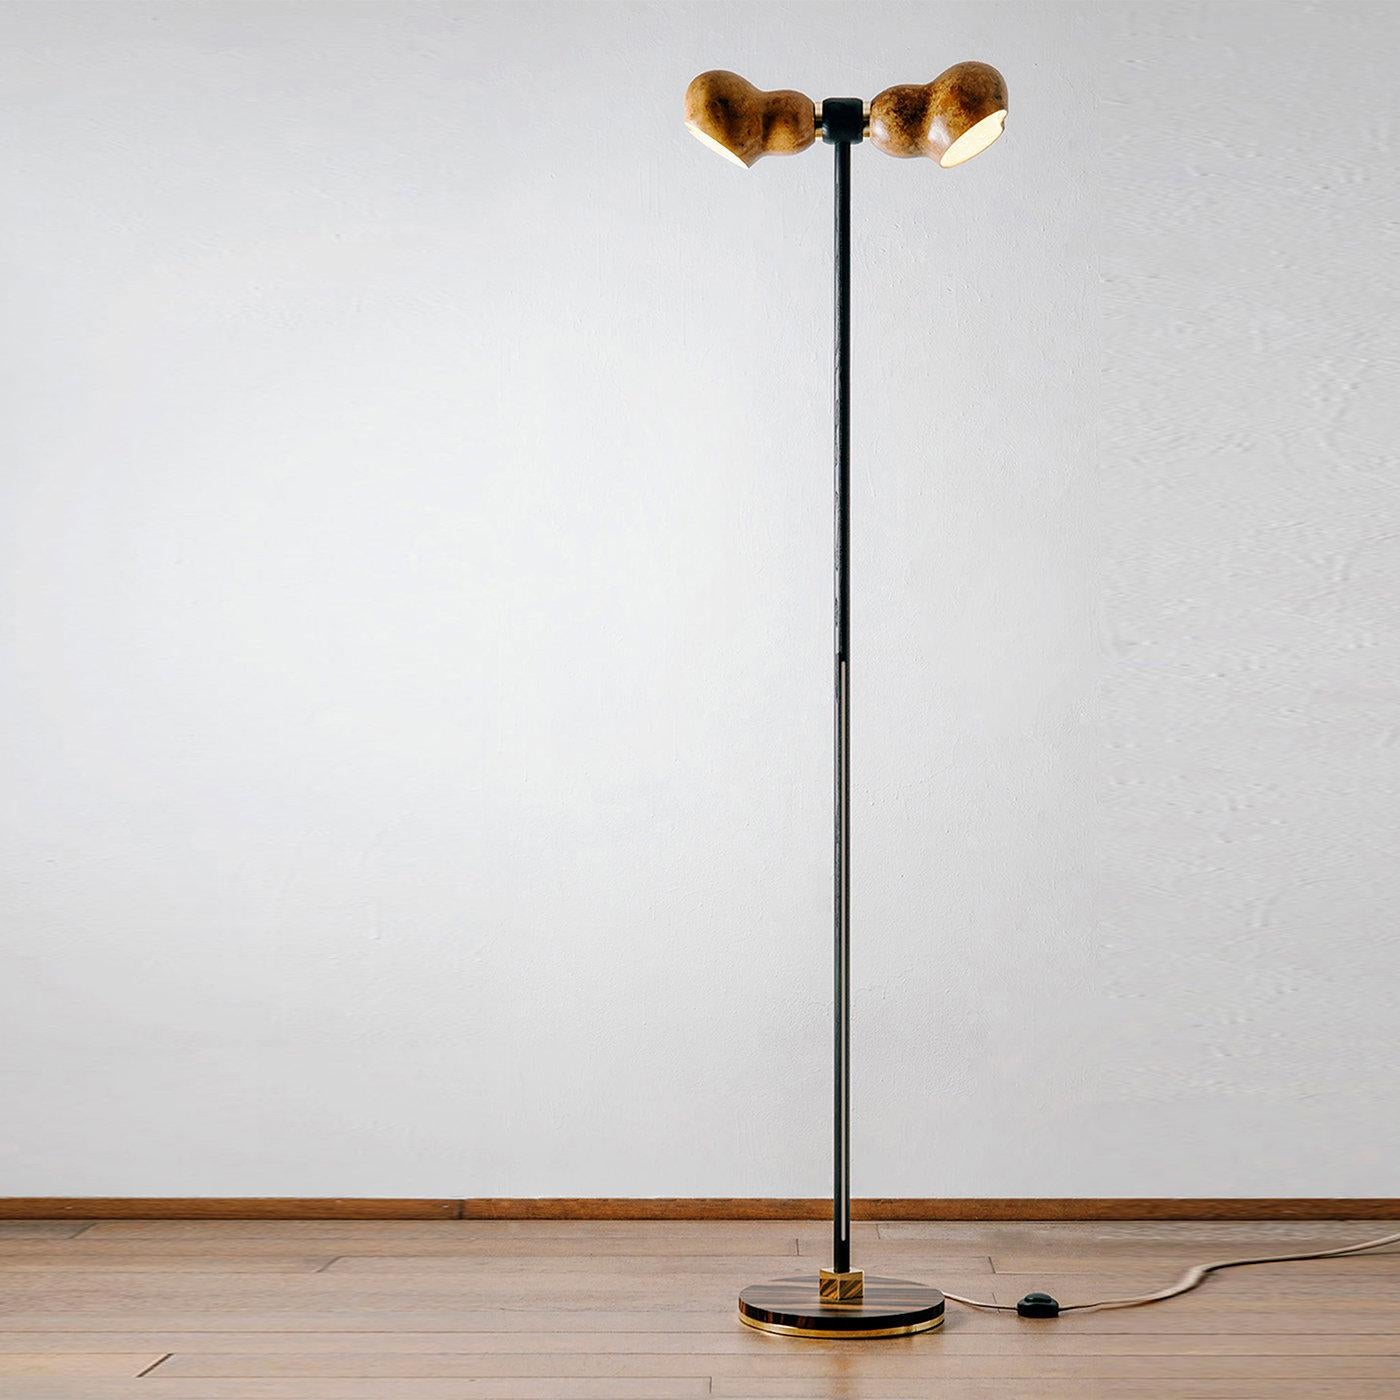 Dual is an elegant sustainable floor lamp made of water-painted ash wood, dried Lagenaria gourd and recycled copper. Its peculiarity is the harmony resulting from the sinuous and soft lines of the lamp. The supporting structure is enlivened by the